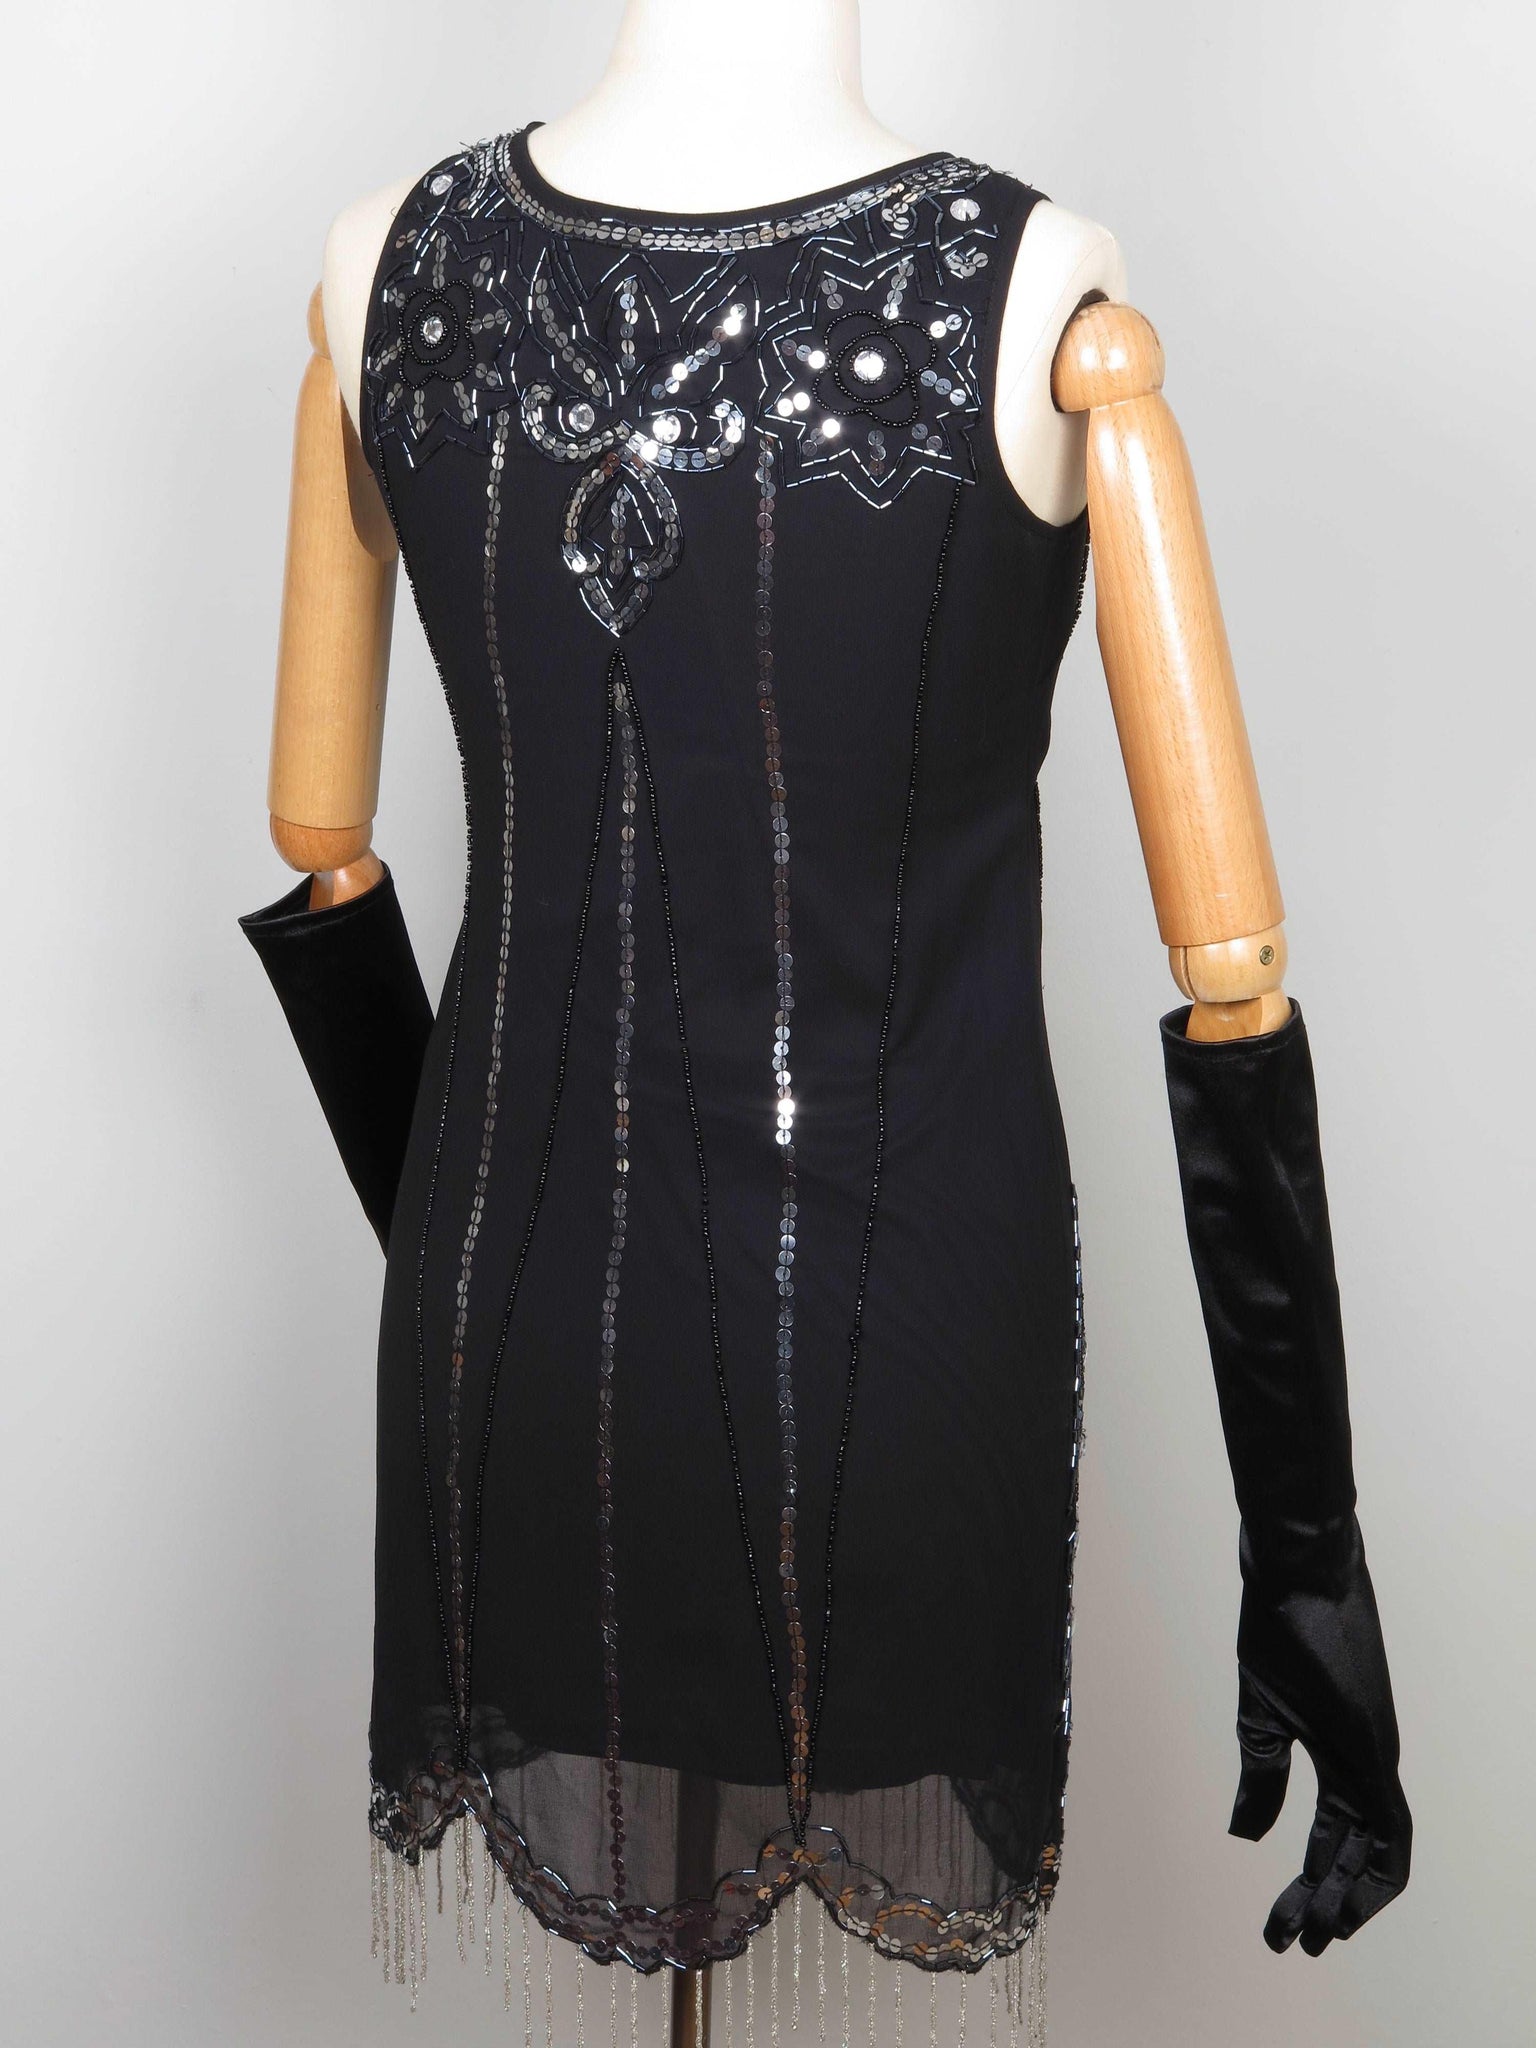 Black 1920s Style Flapper Dress With Beads - The Harlequin